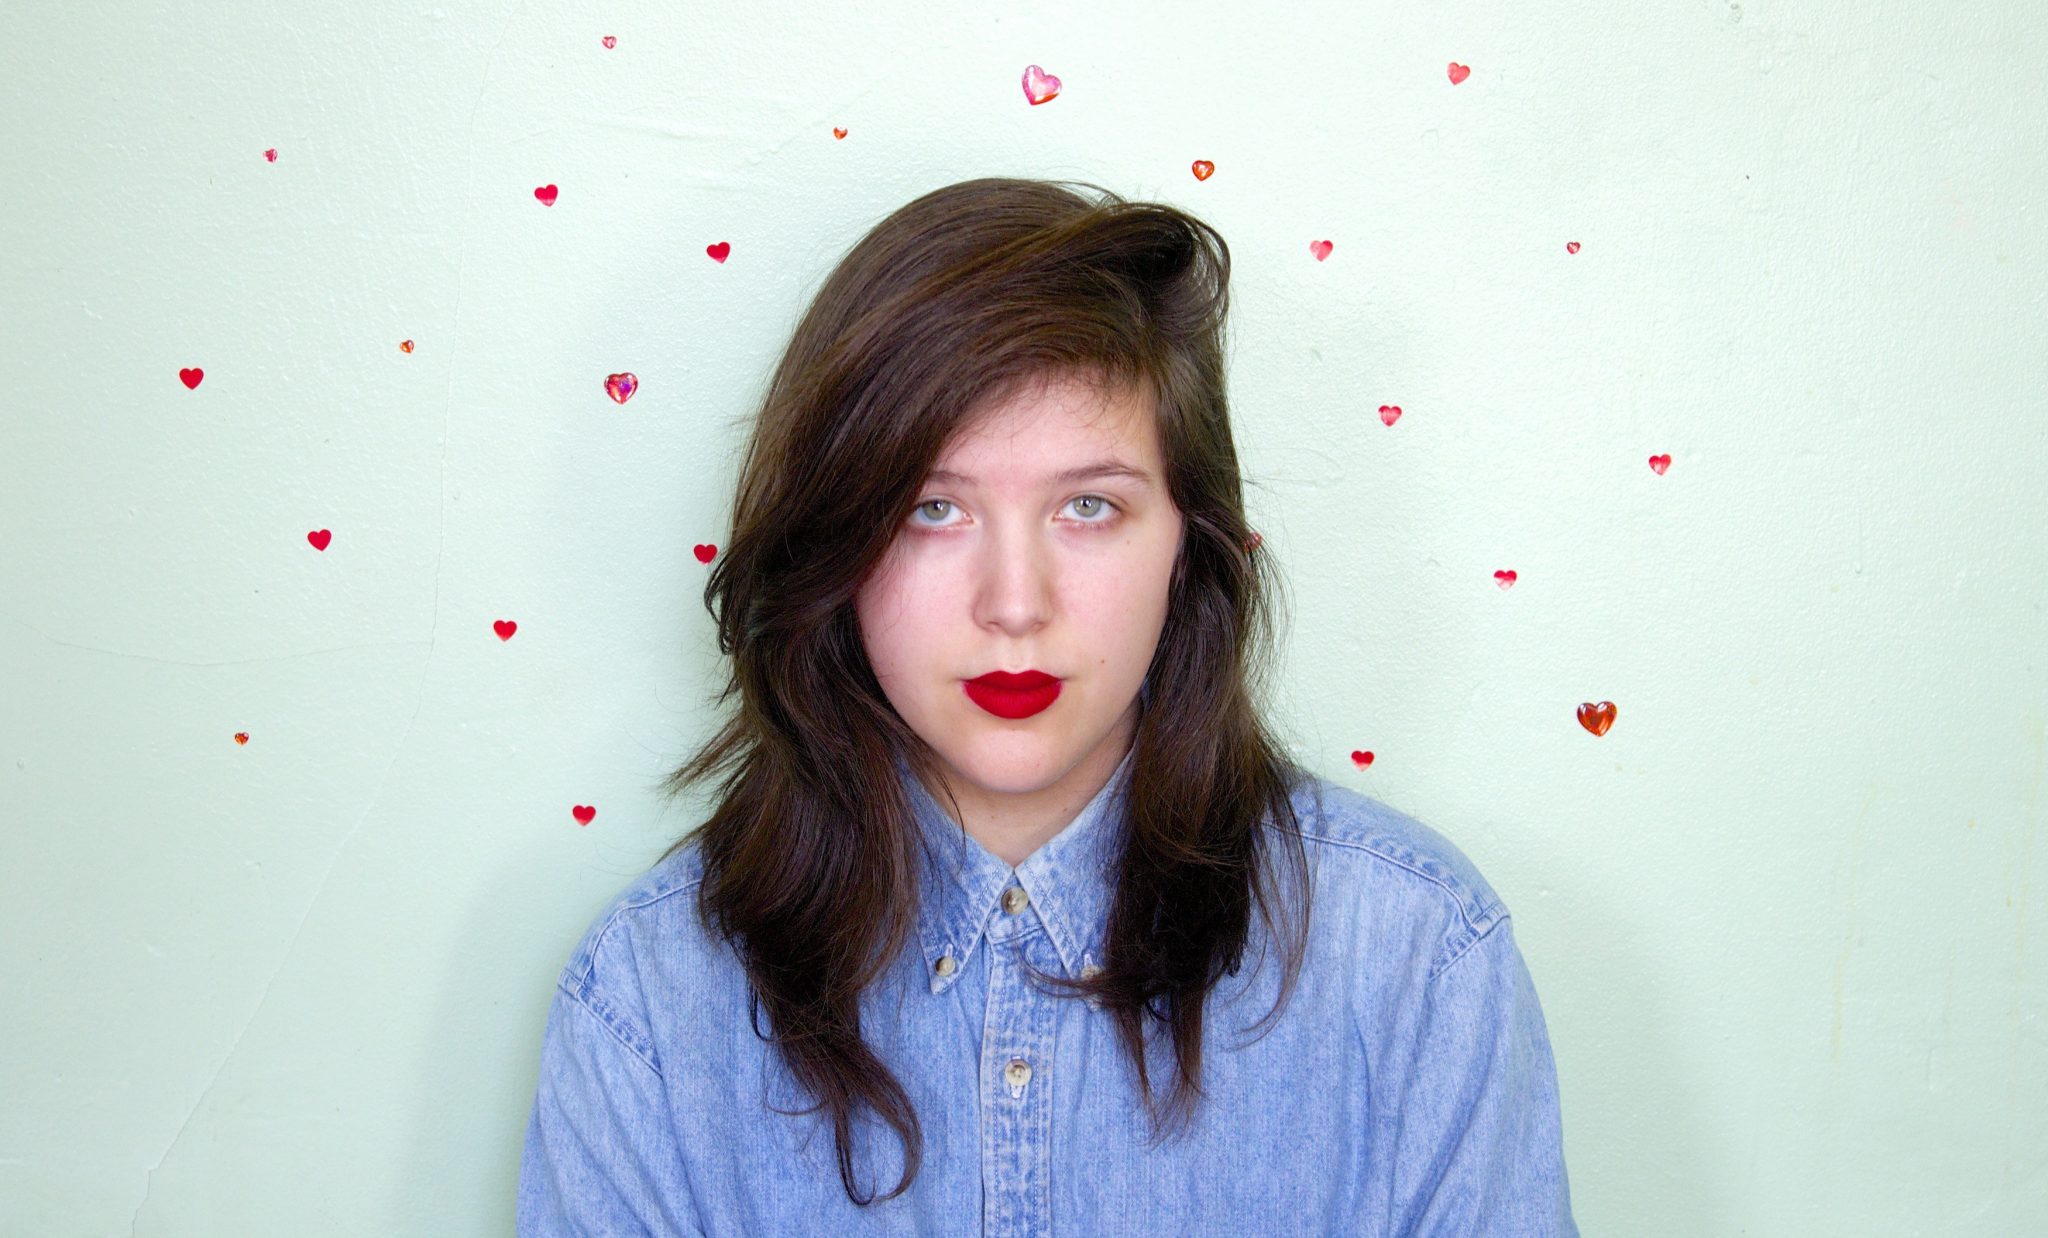 lucy dacus the night shift｜TikTok Search